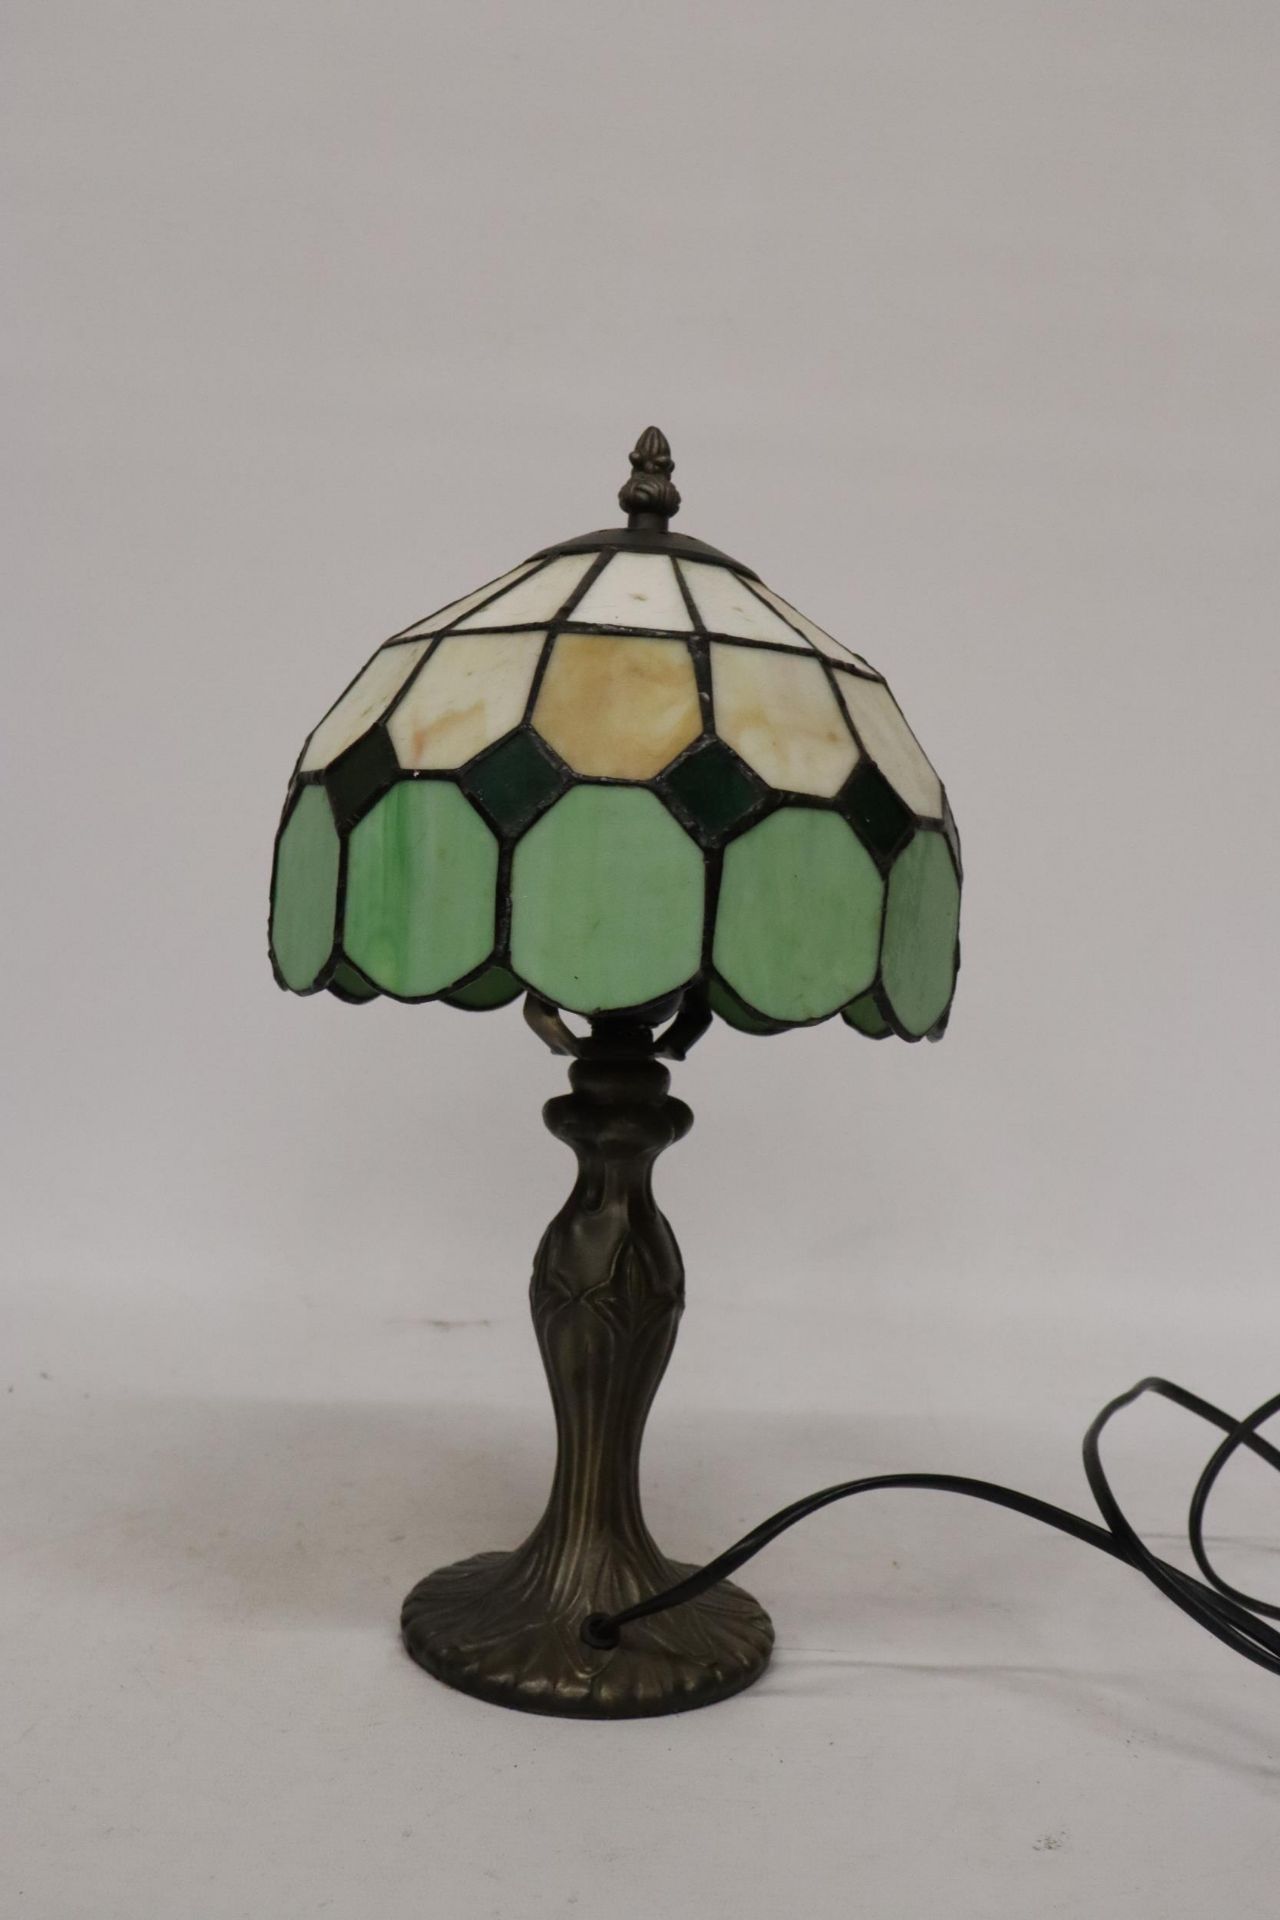 A TIFFANY STYLE TABLE LAMP - Image 2 of 4